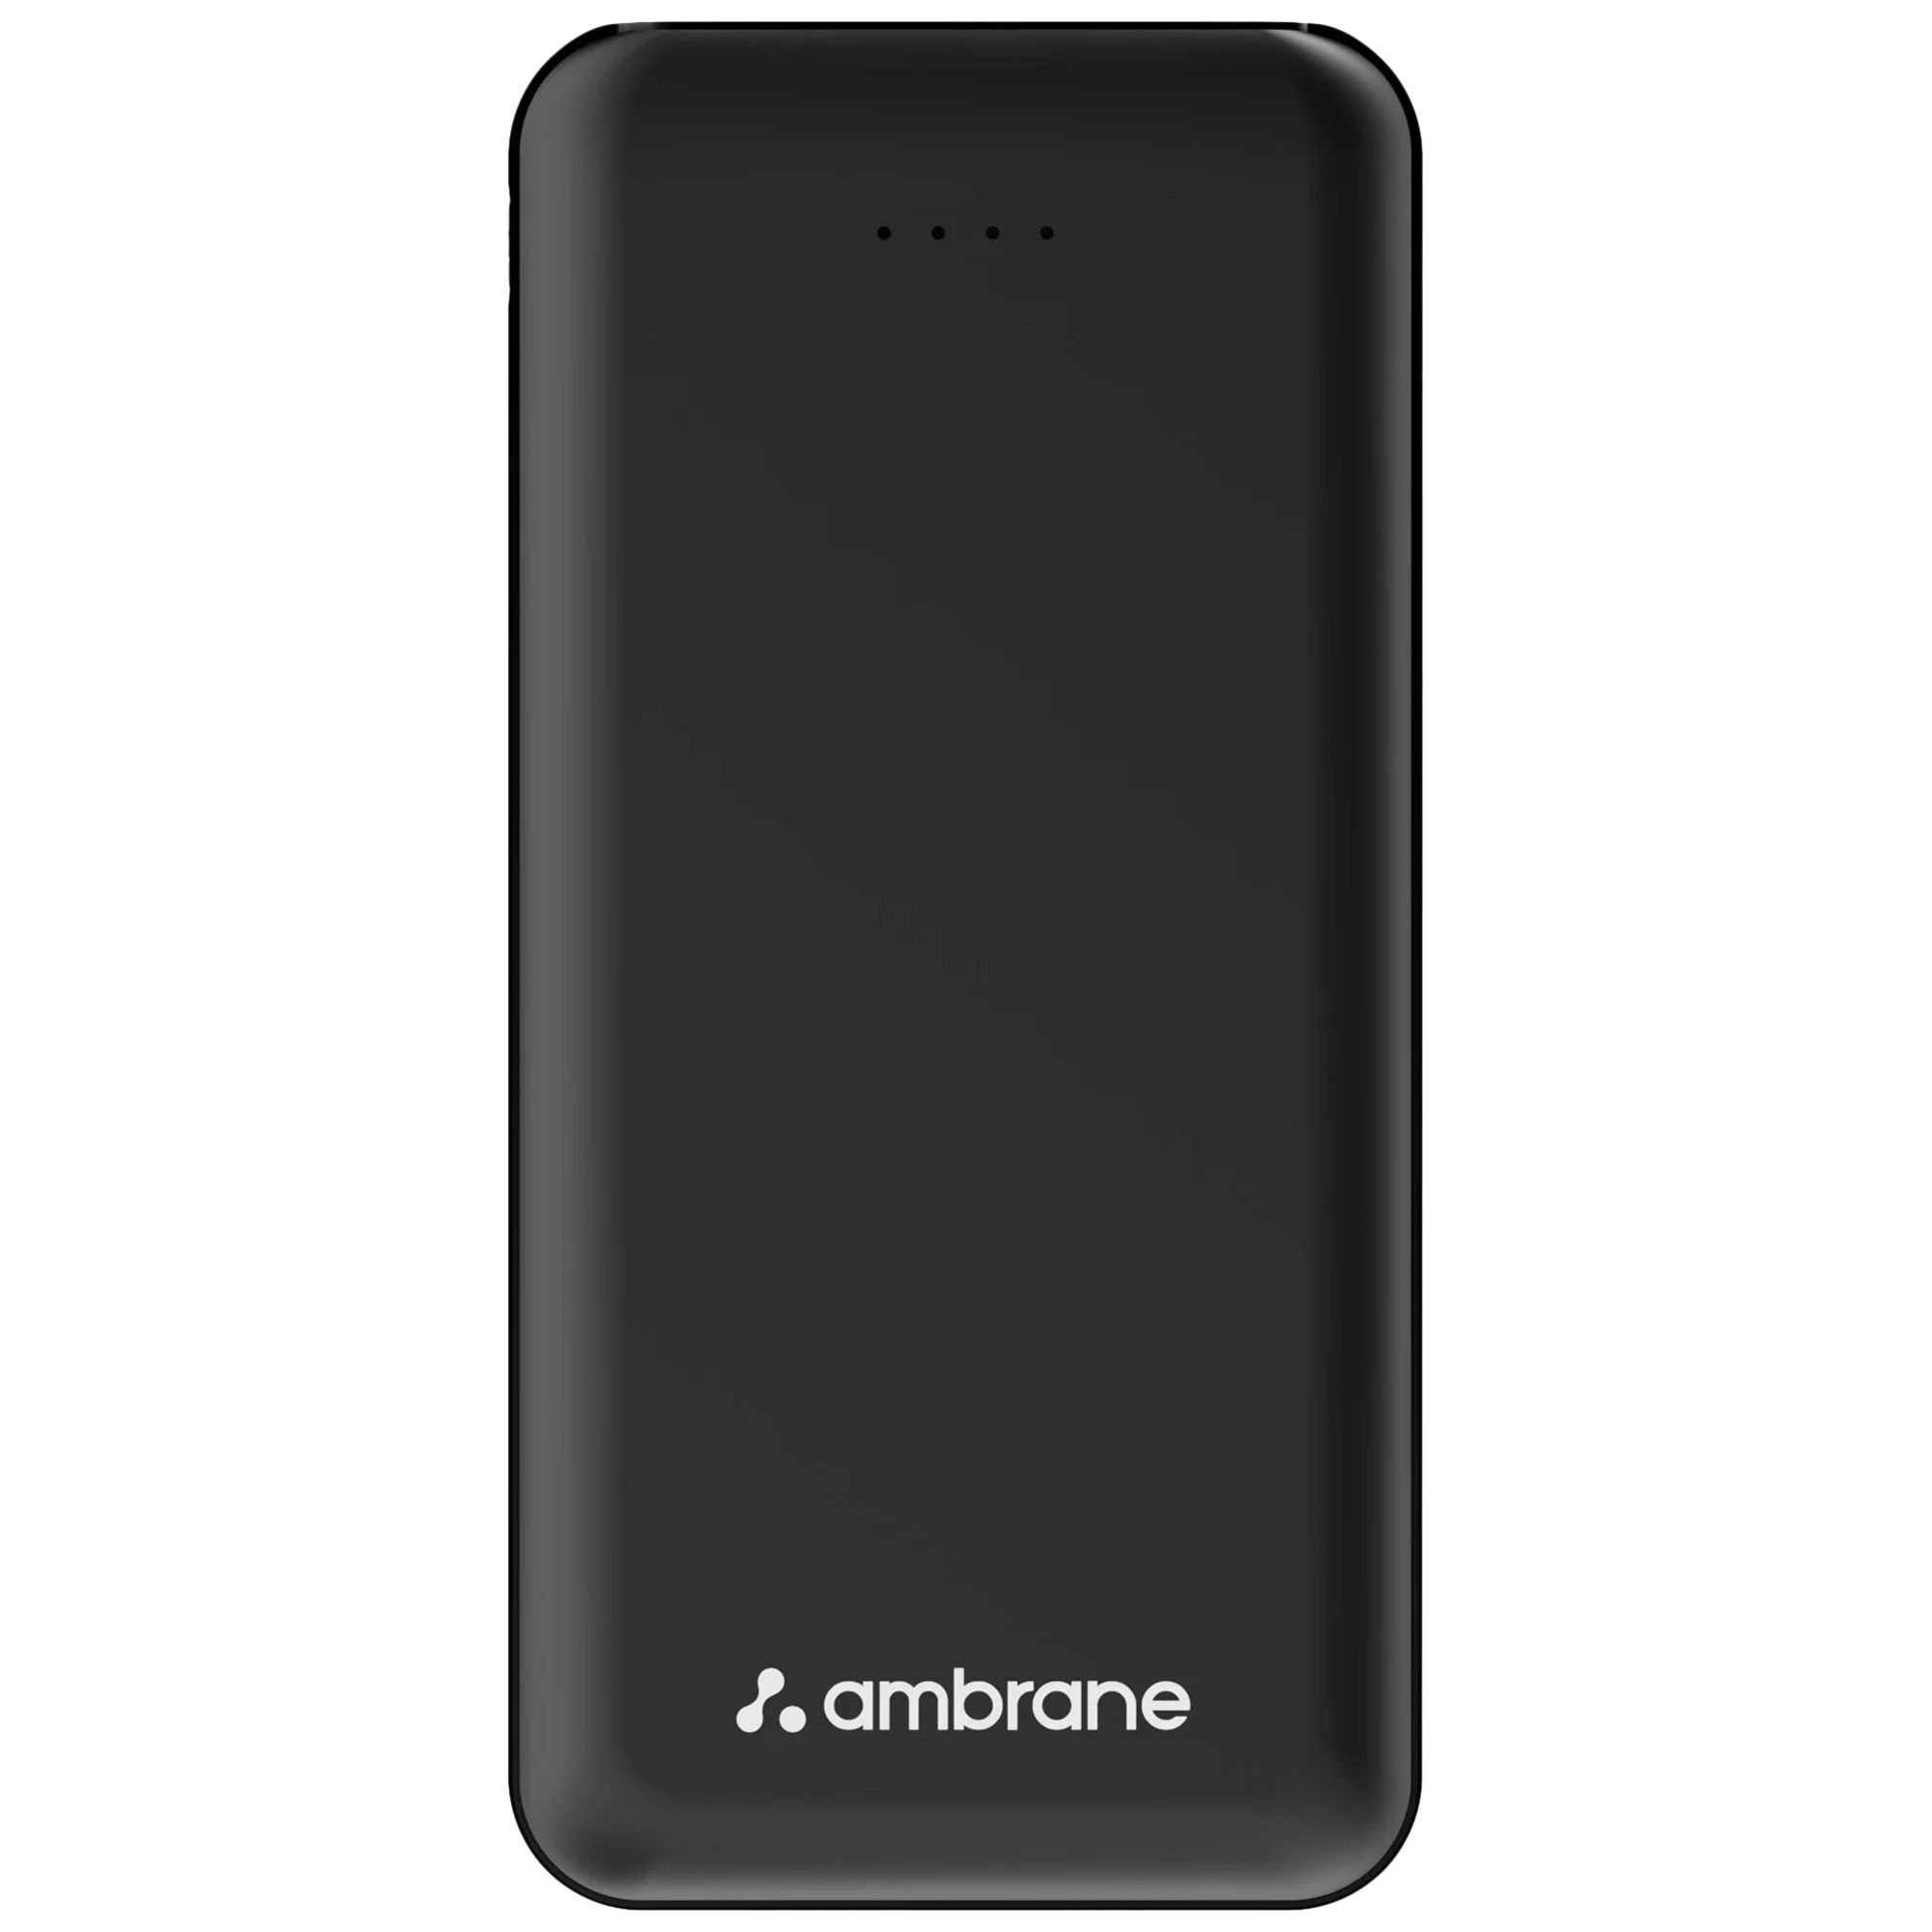 Ambrane Power Bank price in India